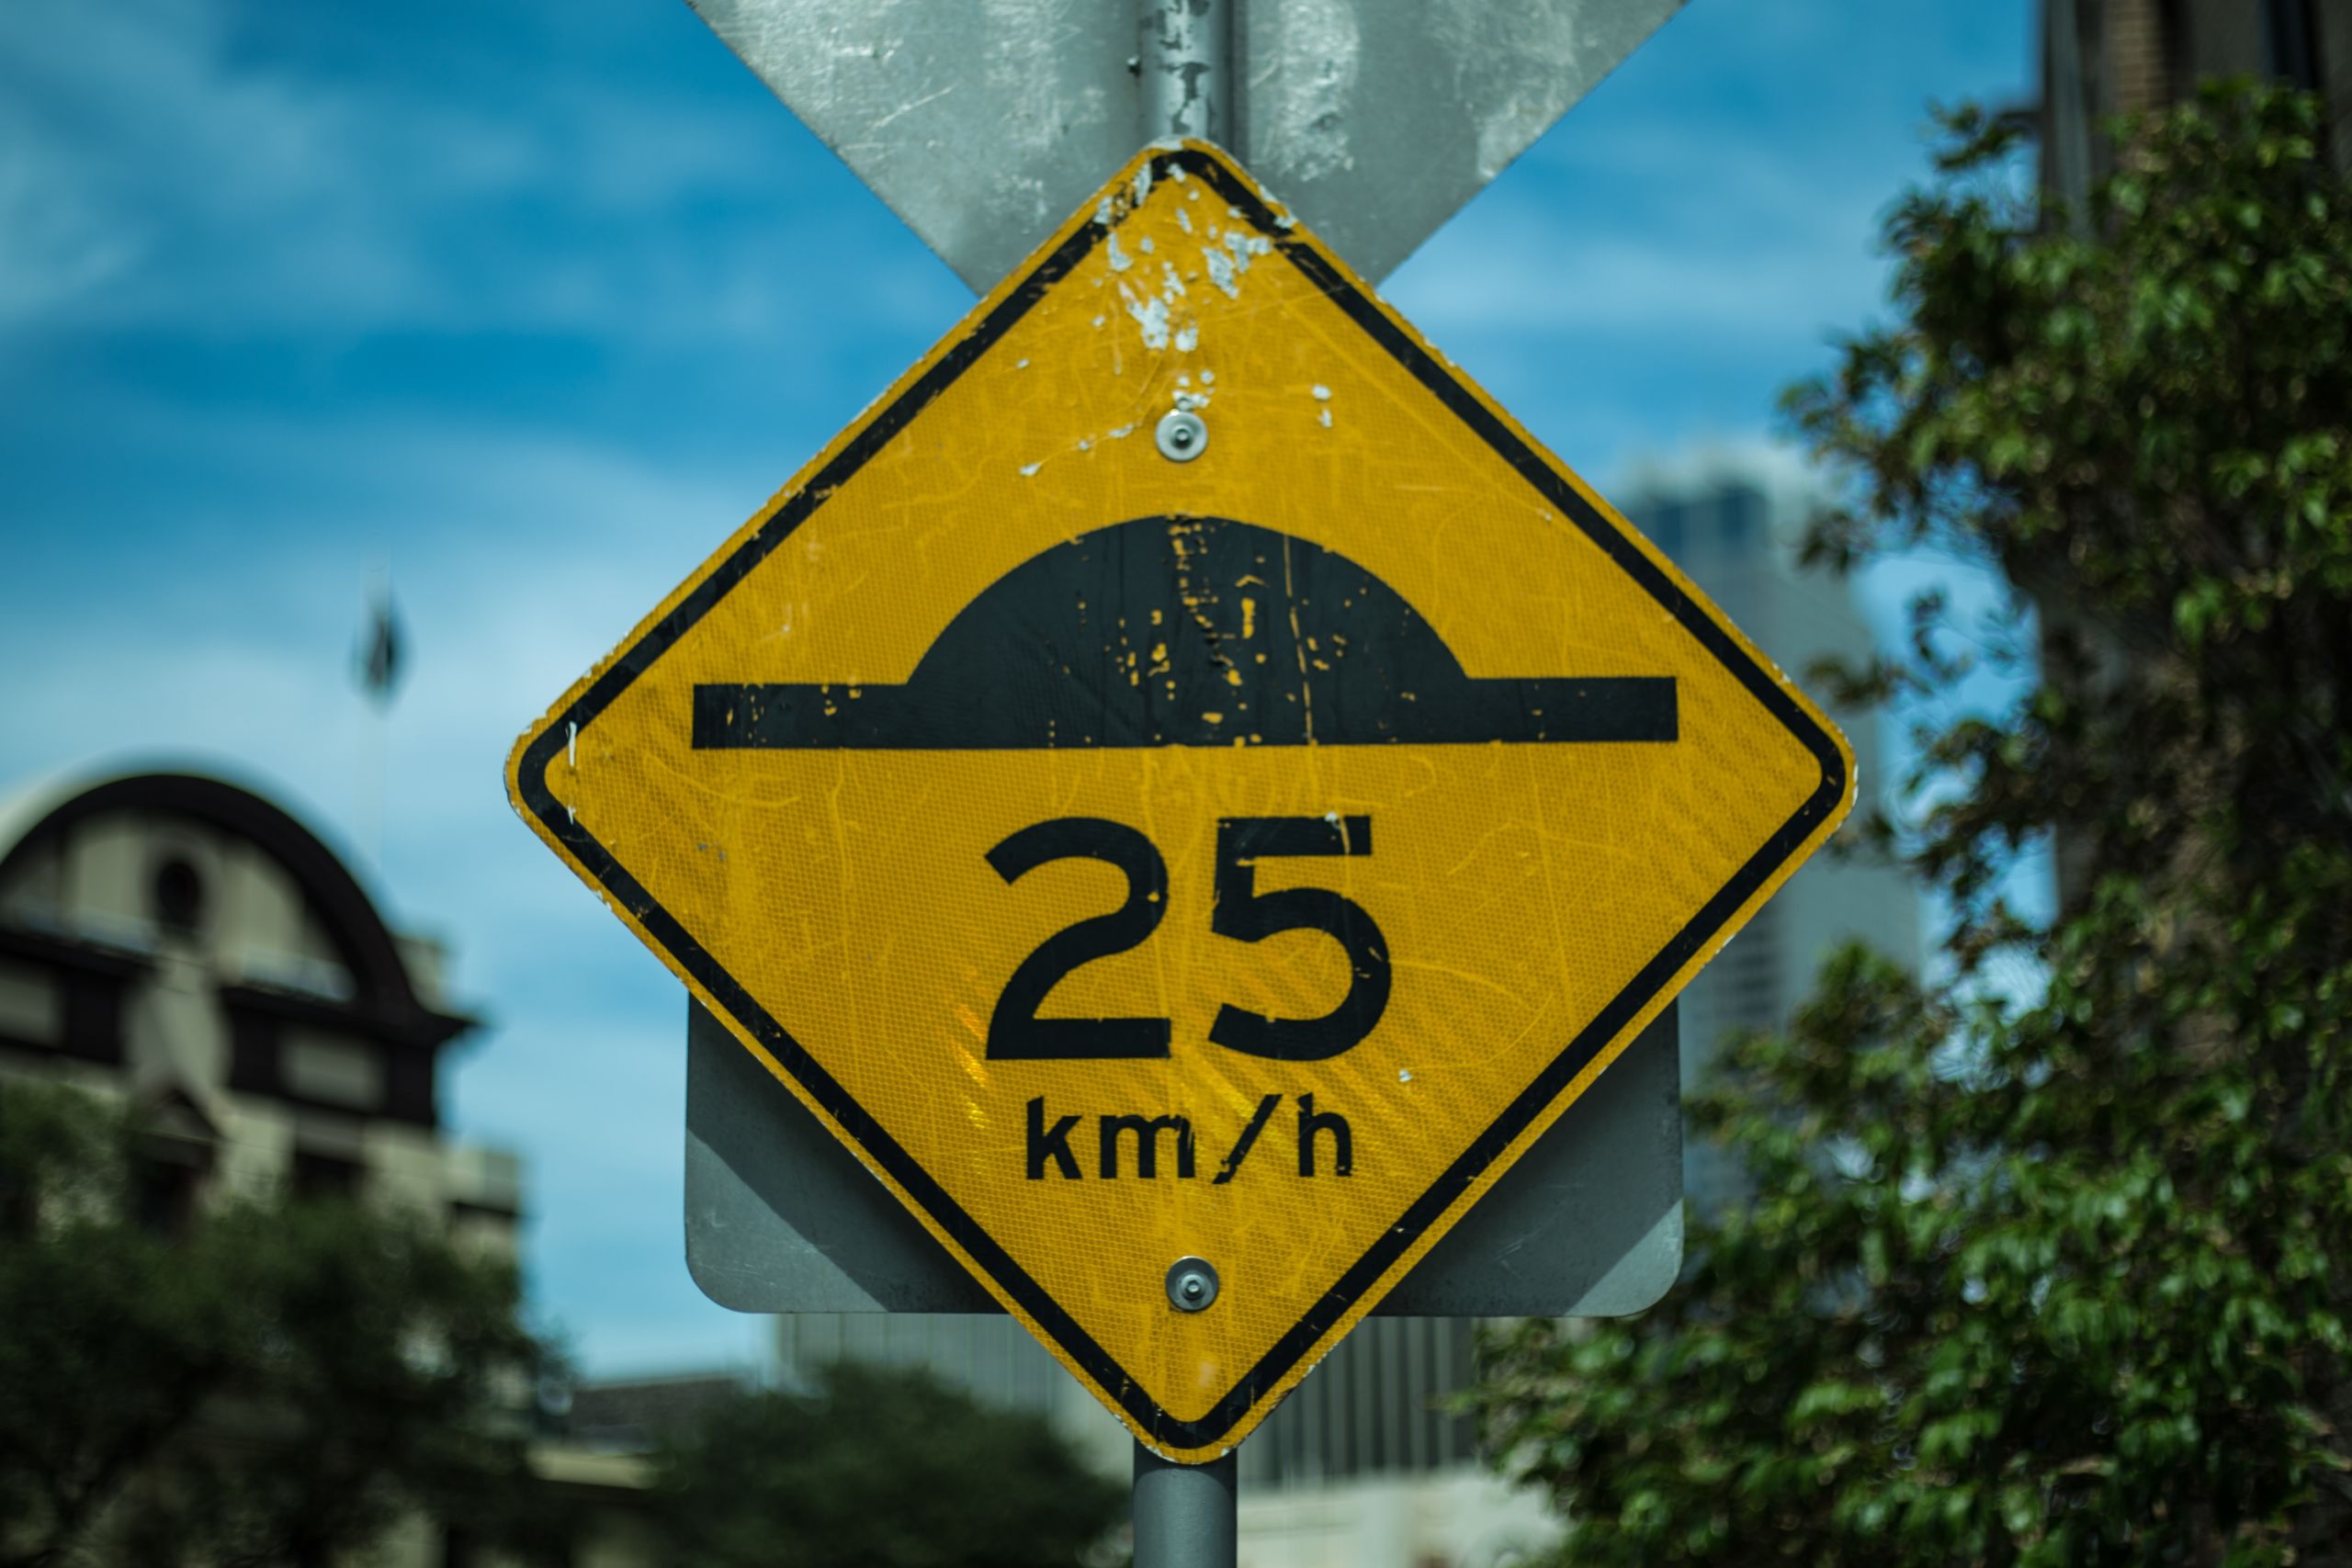 Speed Bumps warning sign showing max speed of 25 km/h